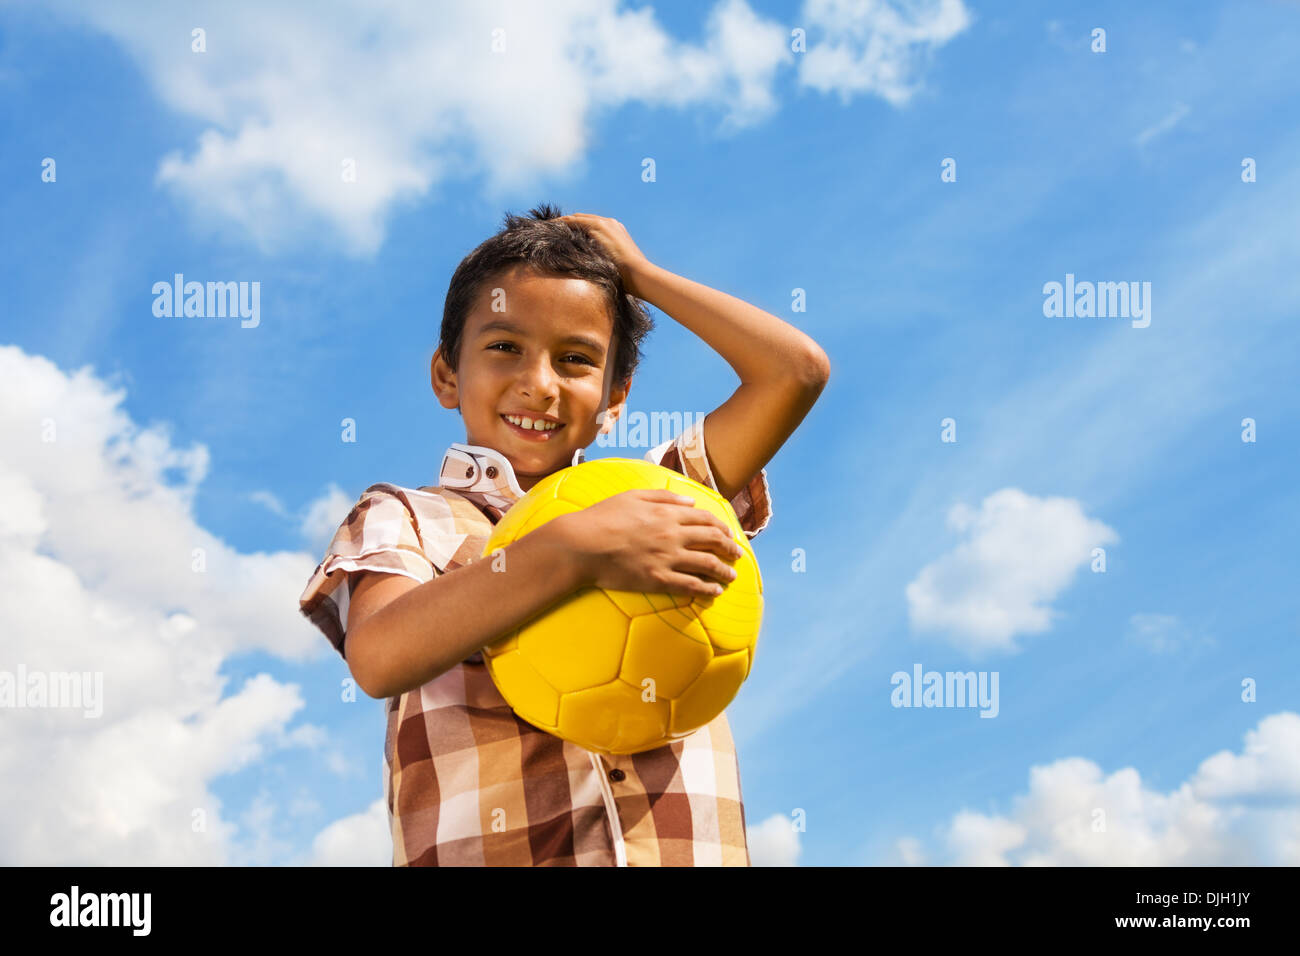 Happy smiling boy with soccer ball holding head with hand on sky background Stock Photo